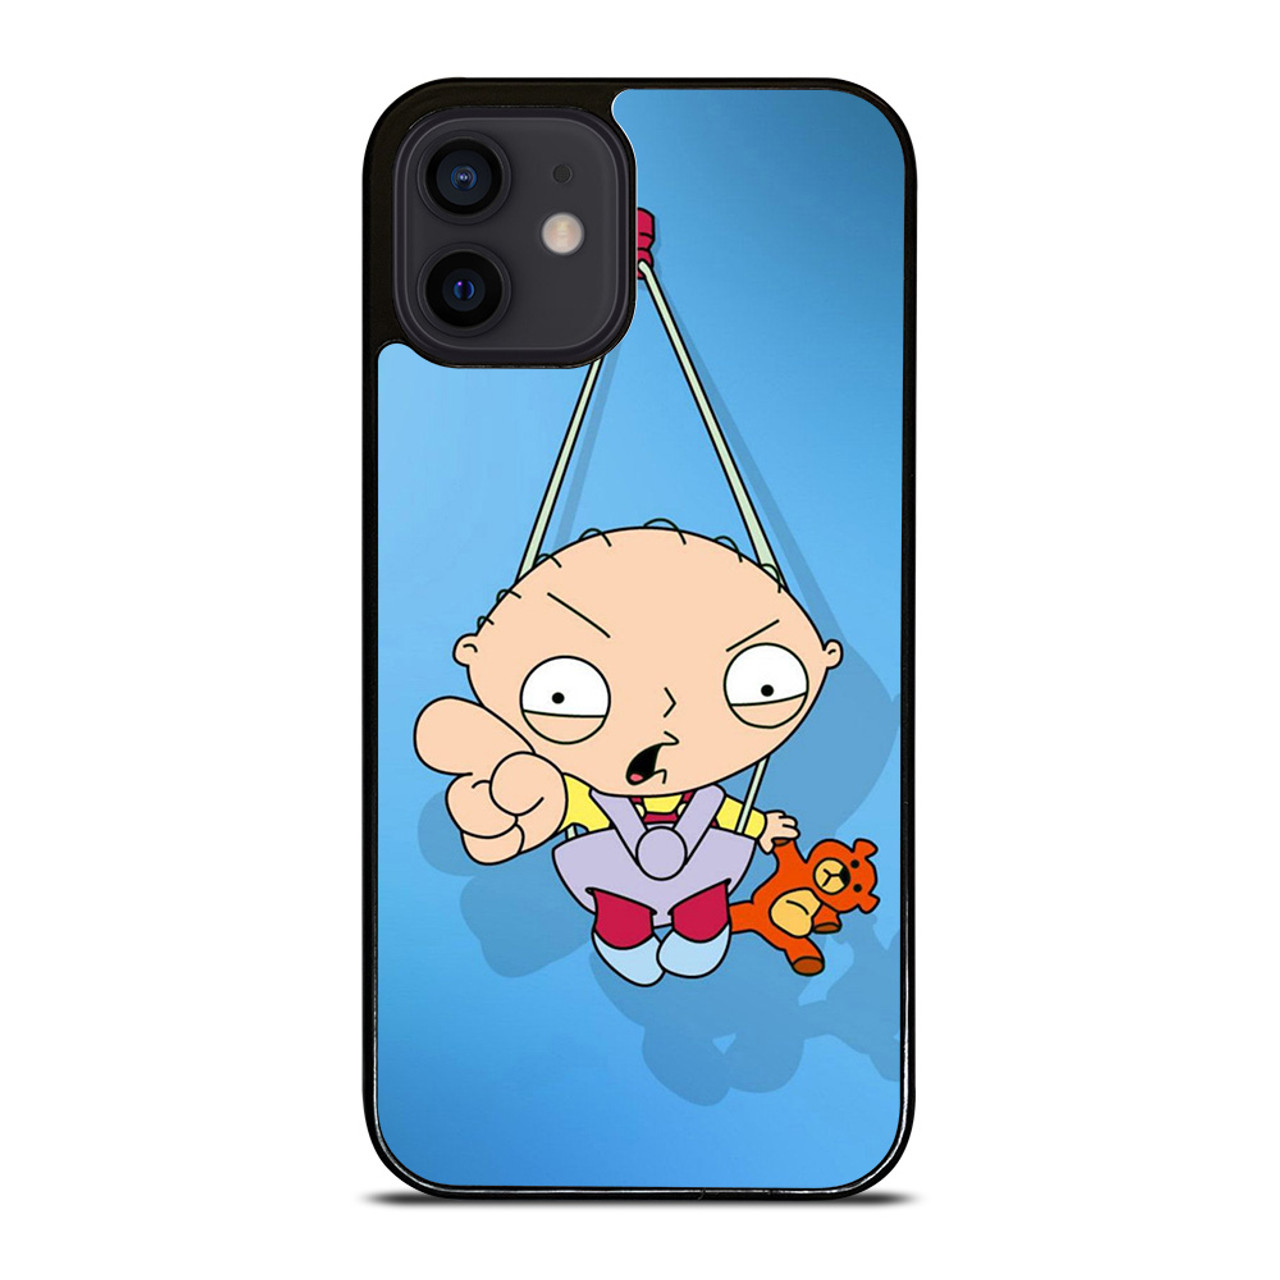 STEWIE GRIFFIN FAMILY GUY SUPREME iPhone 13 Mini Case Cover